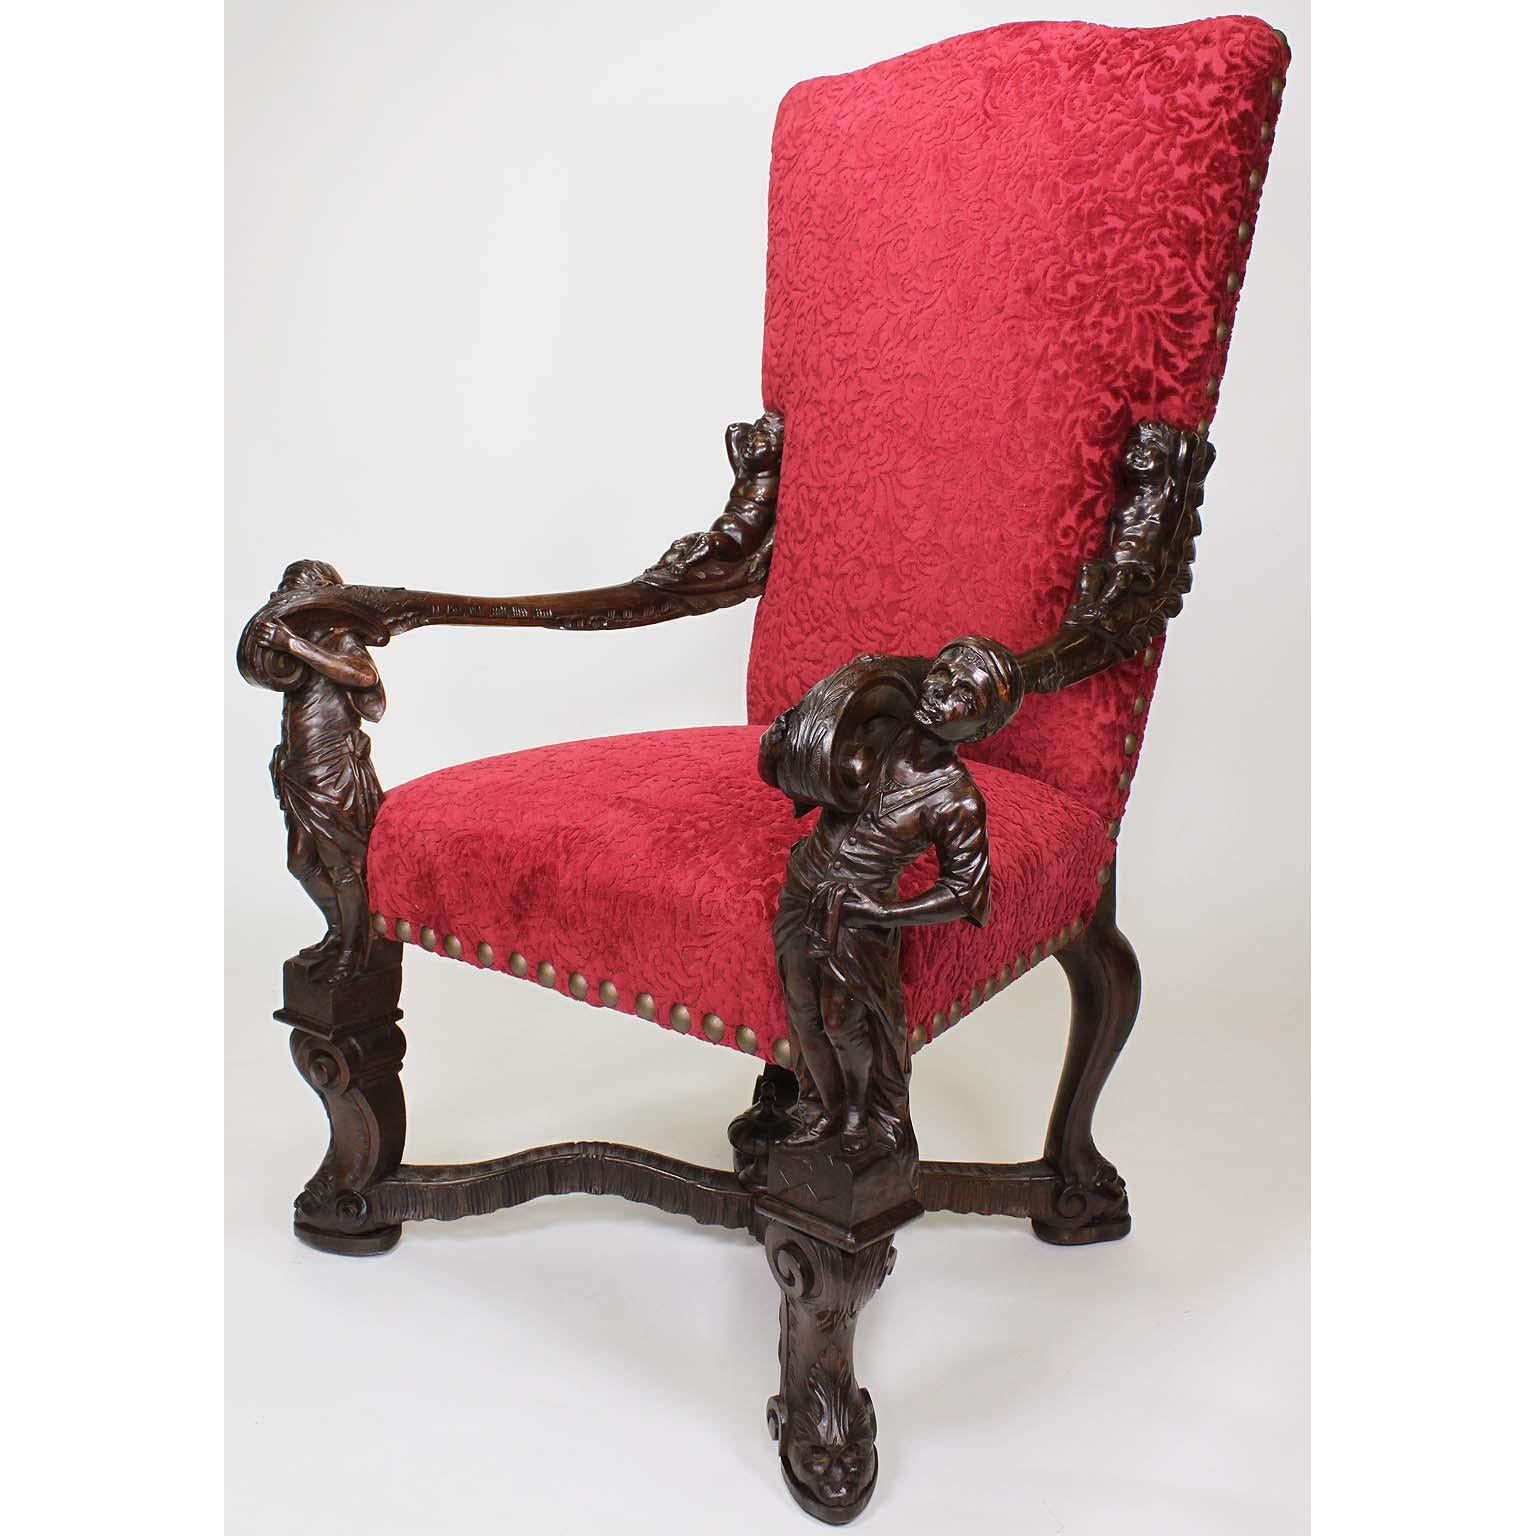 A fine Italian 19th century Baroque style carved walnut figural throne armchair, attributed to Valentino Panciera Besarel (Venice, 1829-1902) in the manner of Andrea Brustolon (1662-1732). The ornately carved frame flanked on each side by Venetian